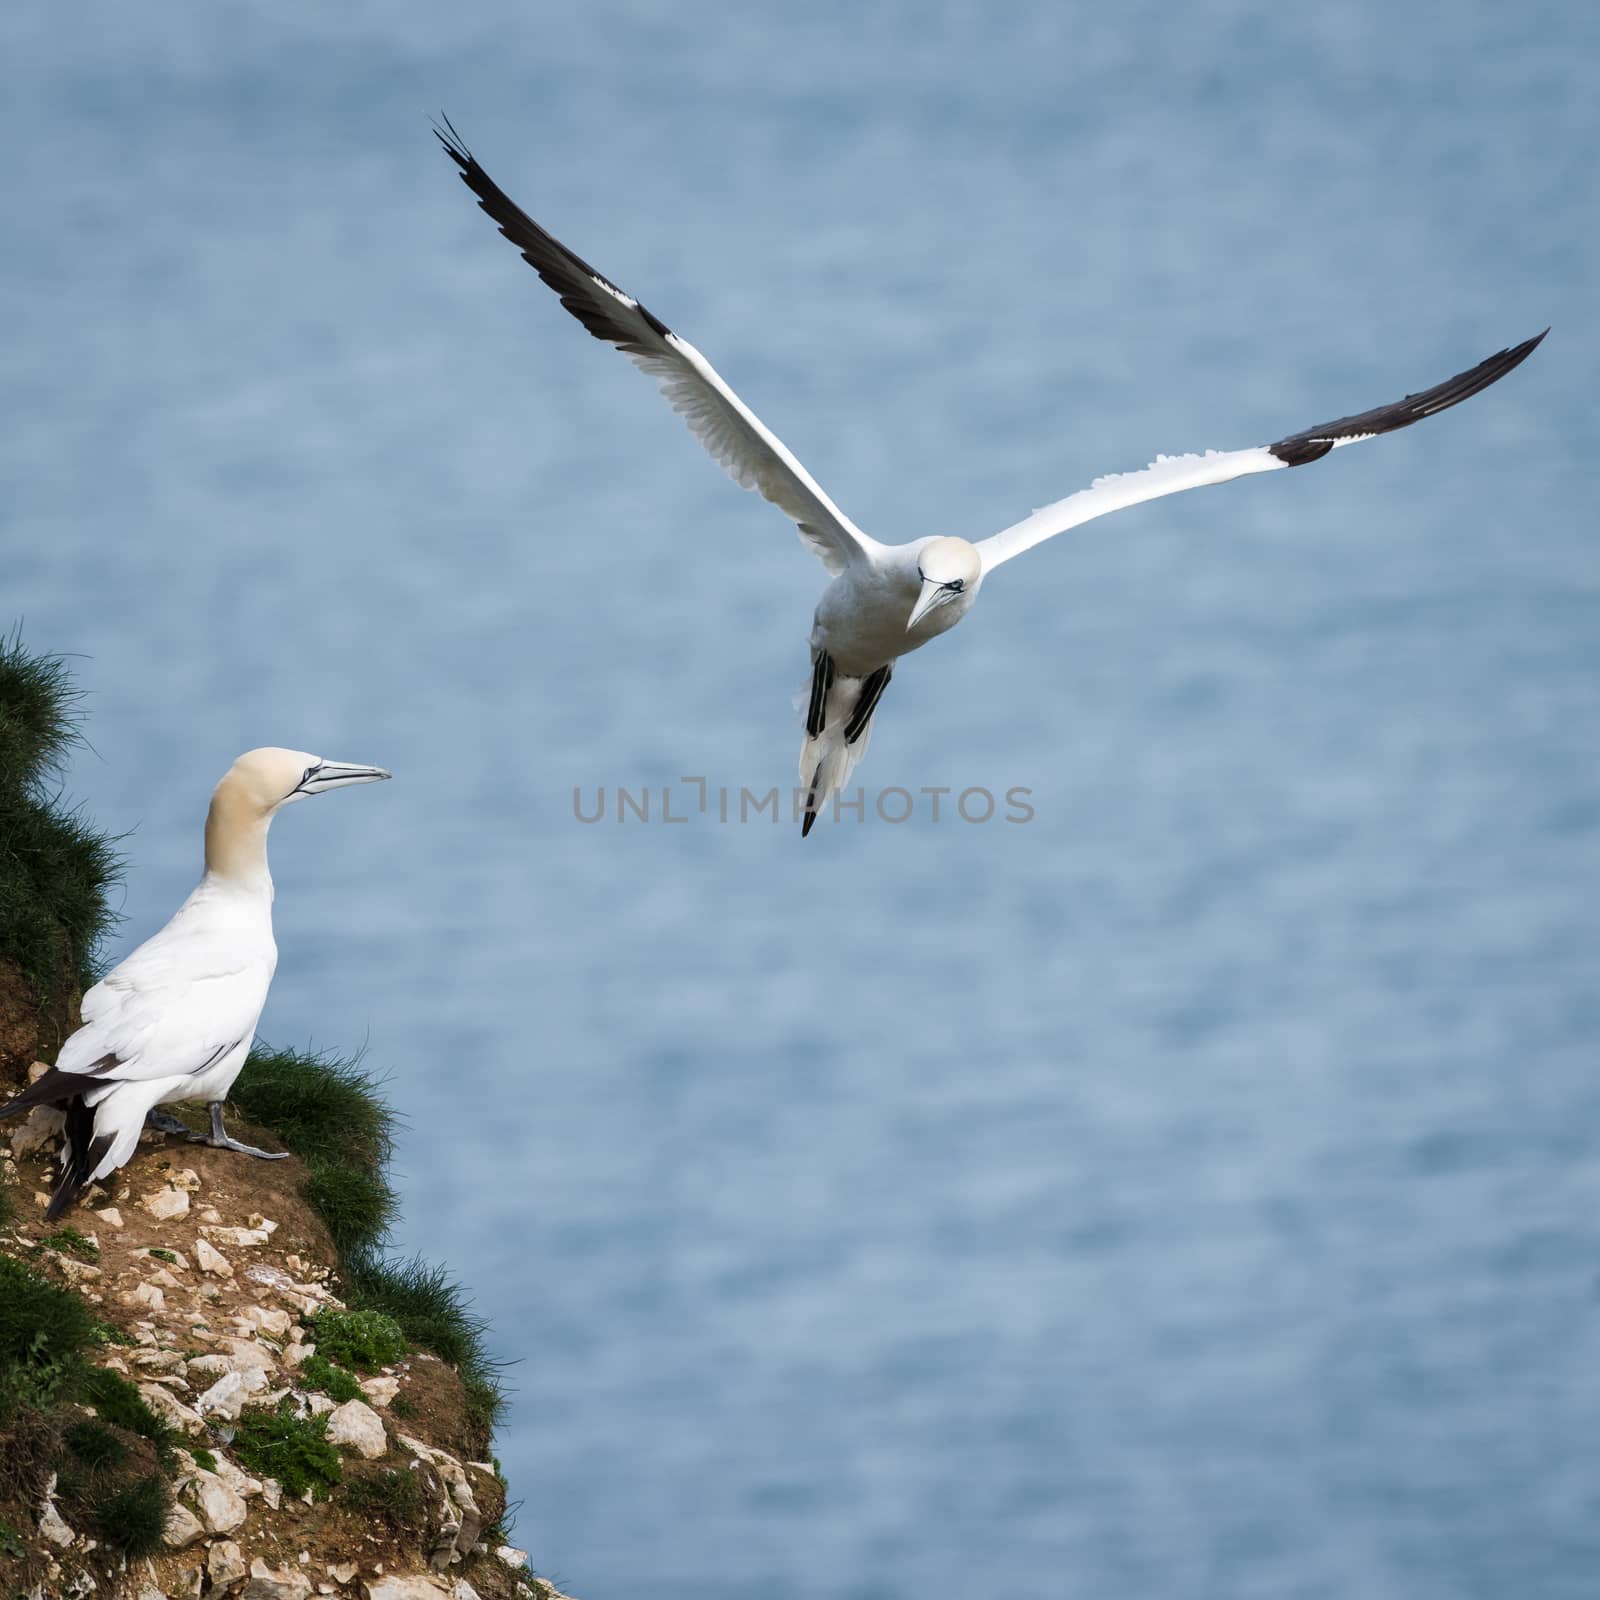 Gannets are seabirds comprising the genus Morus, in the family Sulidae, closely related to boobies. They have a maximum lifespan of up to 35 years. The gannets are large white birds with yellowish heads; black-tipped wings; and long bills.